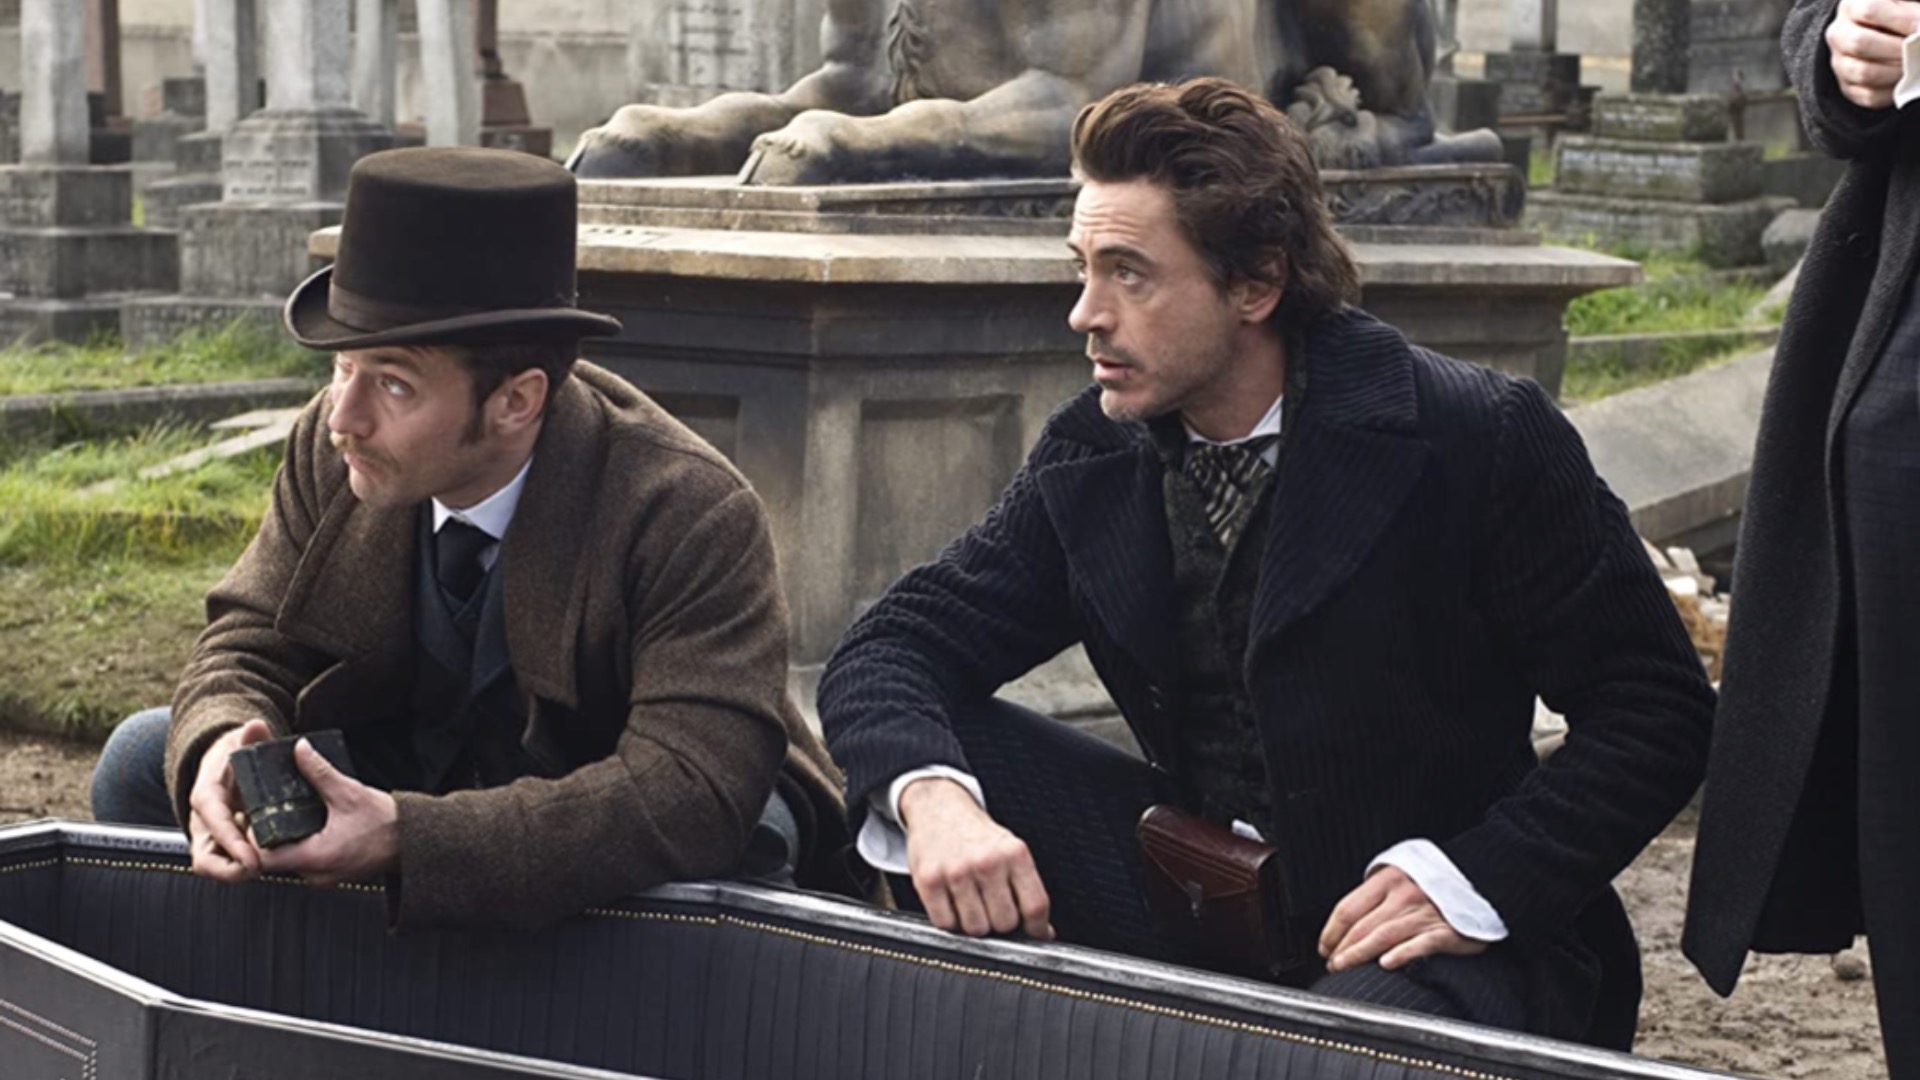 Sherlock Holmes TV series reportedly in the works from Robert Downey Jr.